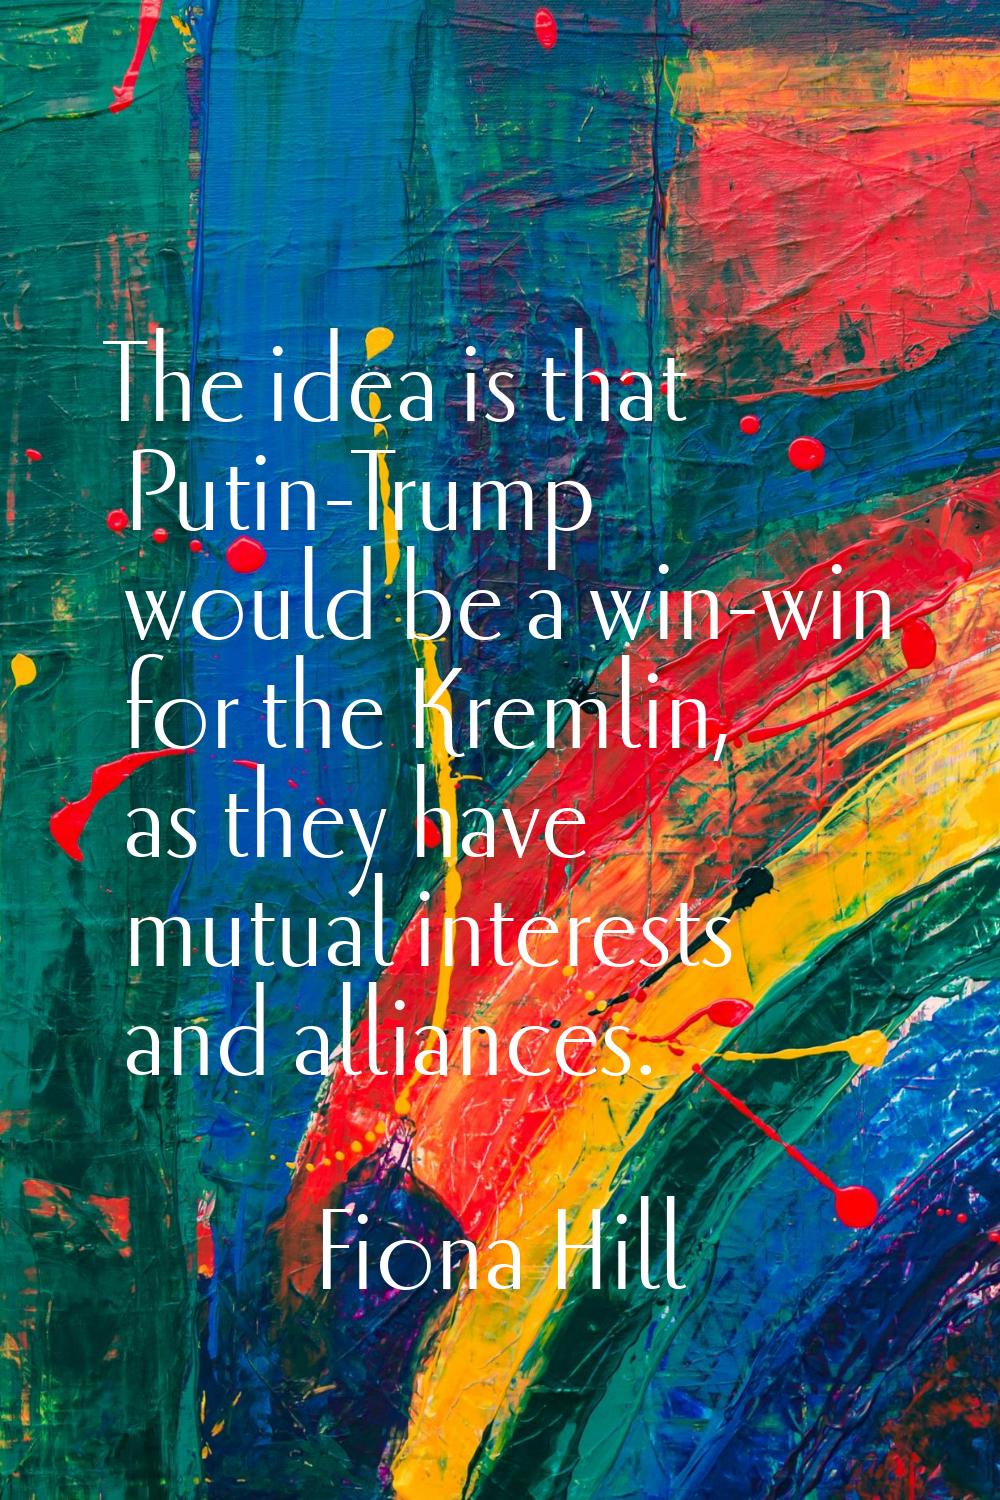 The idea is that Putin-Trump would be a win-win for the Kremlin, as they have mutual interests and 